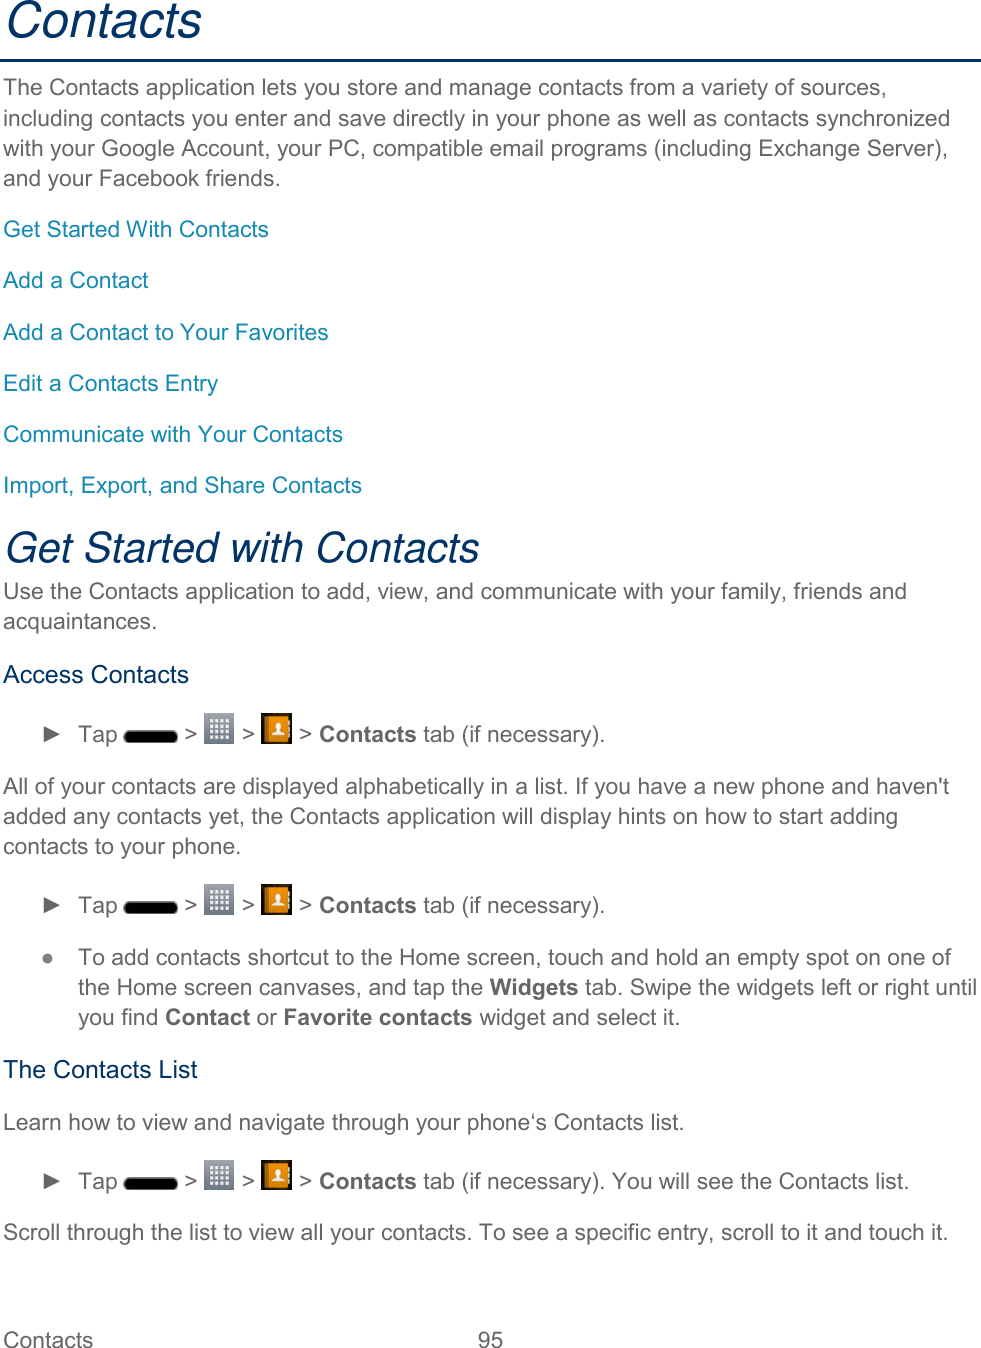  Contacts  95   Contacts The Contacts application lets you store and manage contacts from a variety of sources, including contacts you enter and save directly in your phone as well as contacts synchronized with your Google Account, your PC, compatible email programs (including Exchange Server), and your Facebook friends. Get Started With Contacts Add a Contact Add a Contact to Your Favorites Edit a Contacts Entry Communicate with Your Contacts Import, Export, and Share Contacts Get Started with Contacts Use the Contacts application to add, view, and communicate with your family, friends and acquaintances. Access Contacts ►  Tap   &gt;   &gt;   &gt; Contacts tab (if necessary). All of your contacts are displayed alphabetically in a list. If you have a new phone and haven&apos;t added any contacts yet, the Contacts application will display hints on how to start adding contacts to your phone. ►  Tap   &gt;   &gt;   &gt; Contacts tab (if necessary). ●  To add contacts shortcut to the Home screen, touch and hold an empty spot on one of the Home screen canvases, and tap the Widgets tab. Swipe the widgets left or right until you find Contact or Favorite contacts widget and select it. The Contacts List Learn how to view and navigate through your phone‘s Contacts list. ►  Tap   &gt;   &gt;   &gt; Contacts tab (if necessary). You will see the Contacts list. Scroll through the list to view all your contacts. To see a specific entry, scroll to it and touch it. 